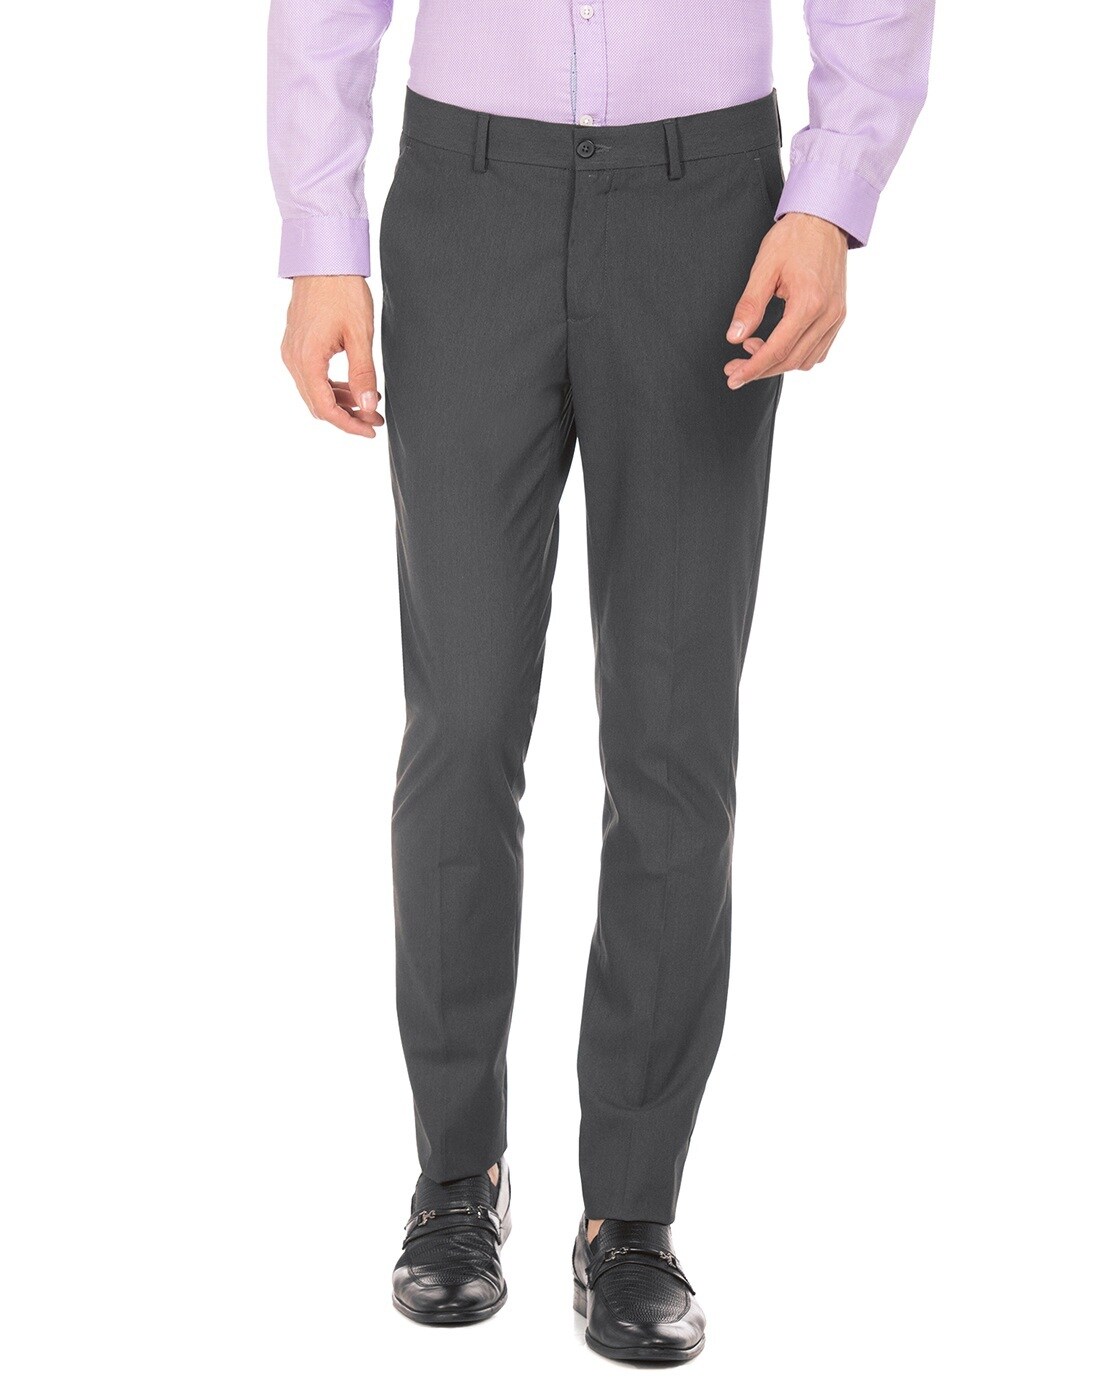 Buy Excalibur Men Grey Woven Check Flat Front Formal Trousers online